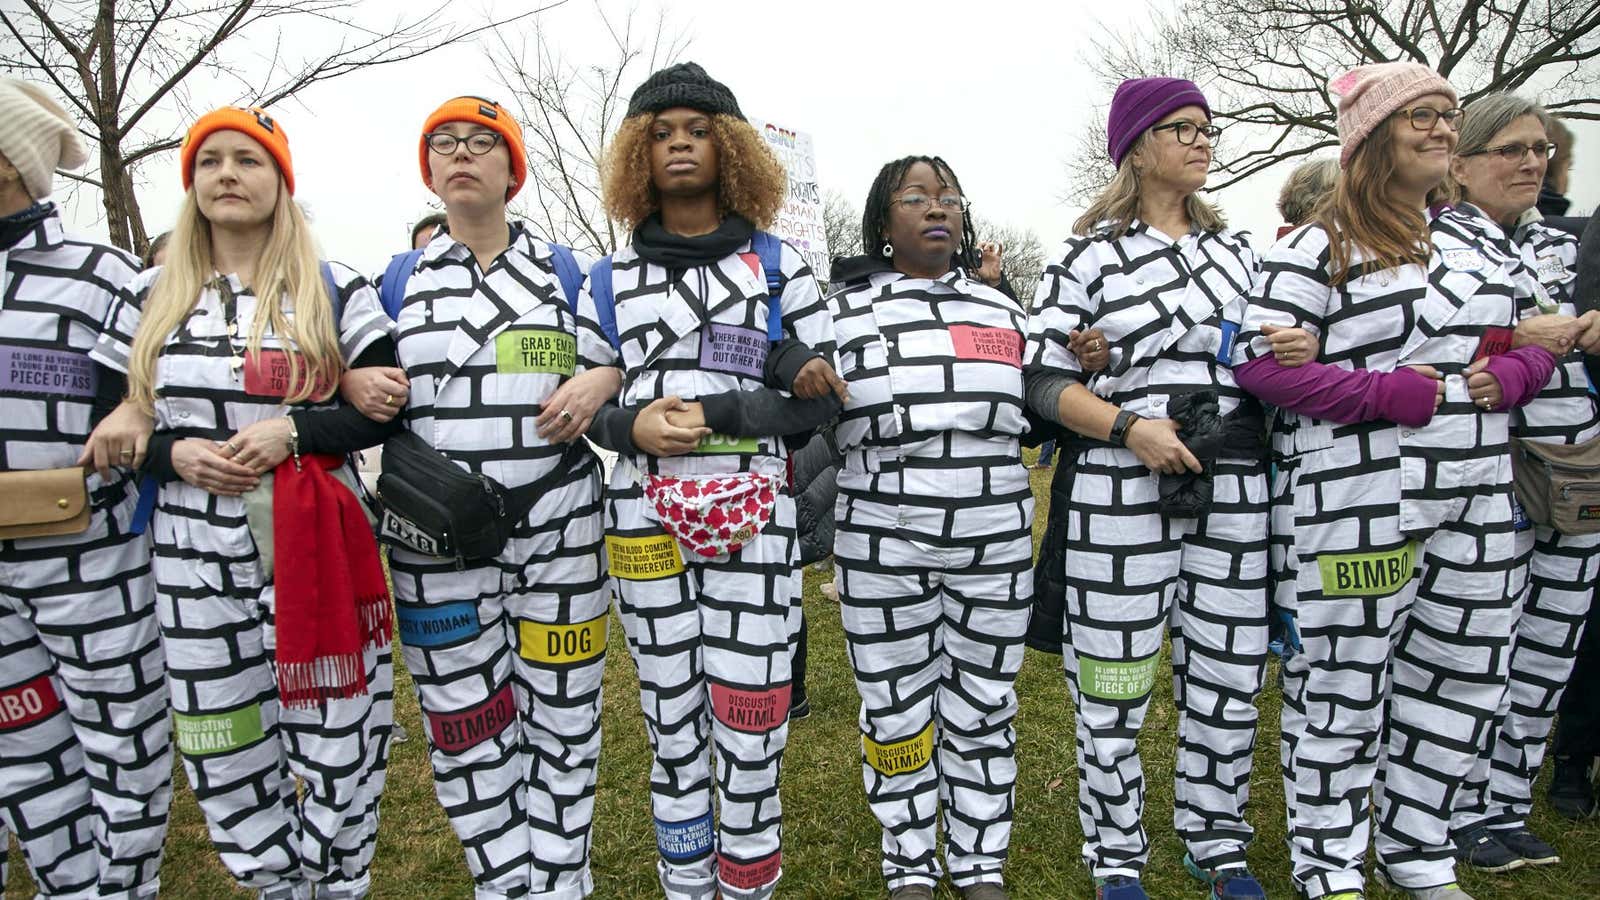 Women’s March protesters plan to create a human wall to end misogyny